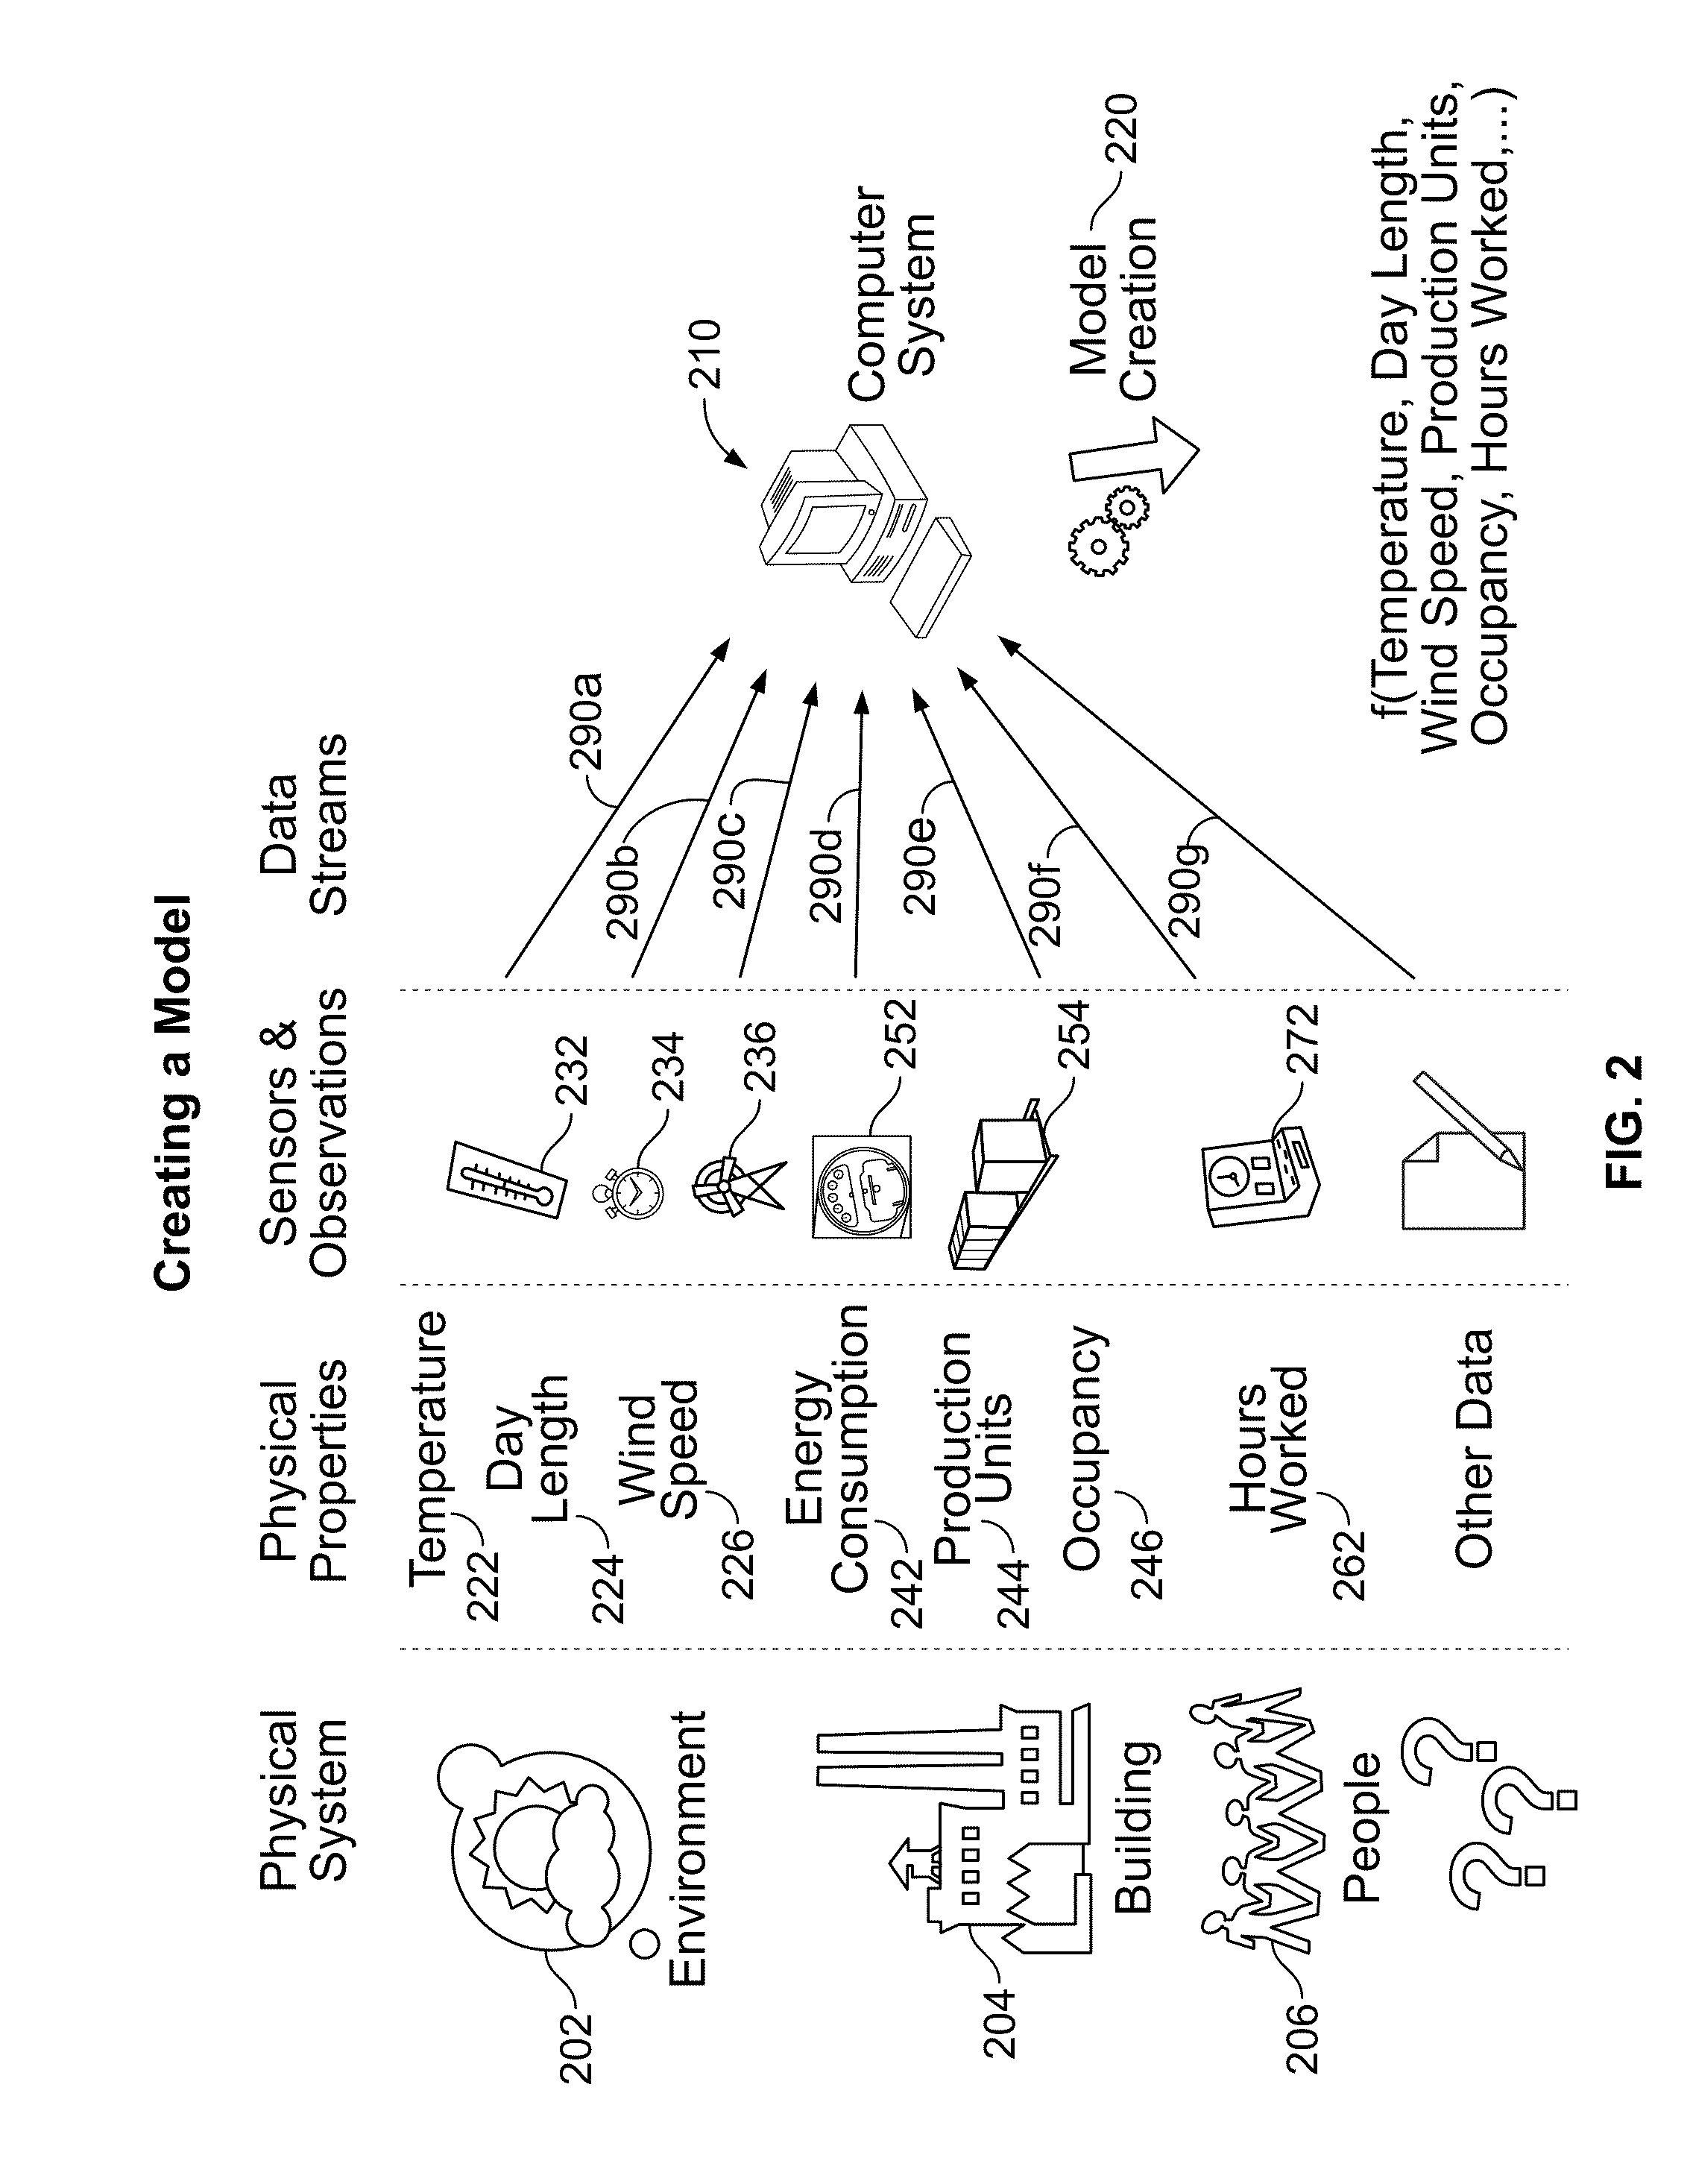 System and method of modeling and monitoring an energy load